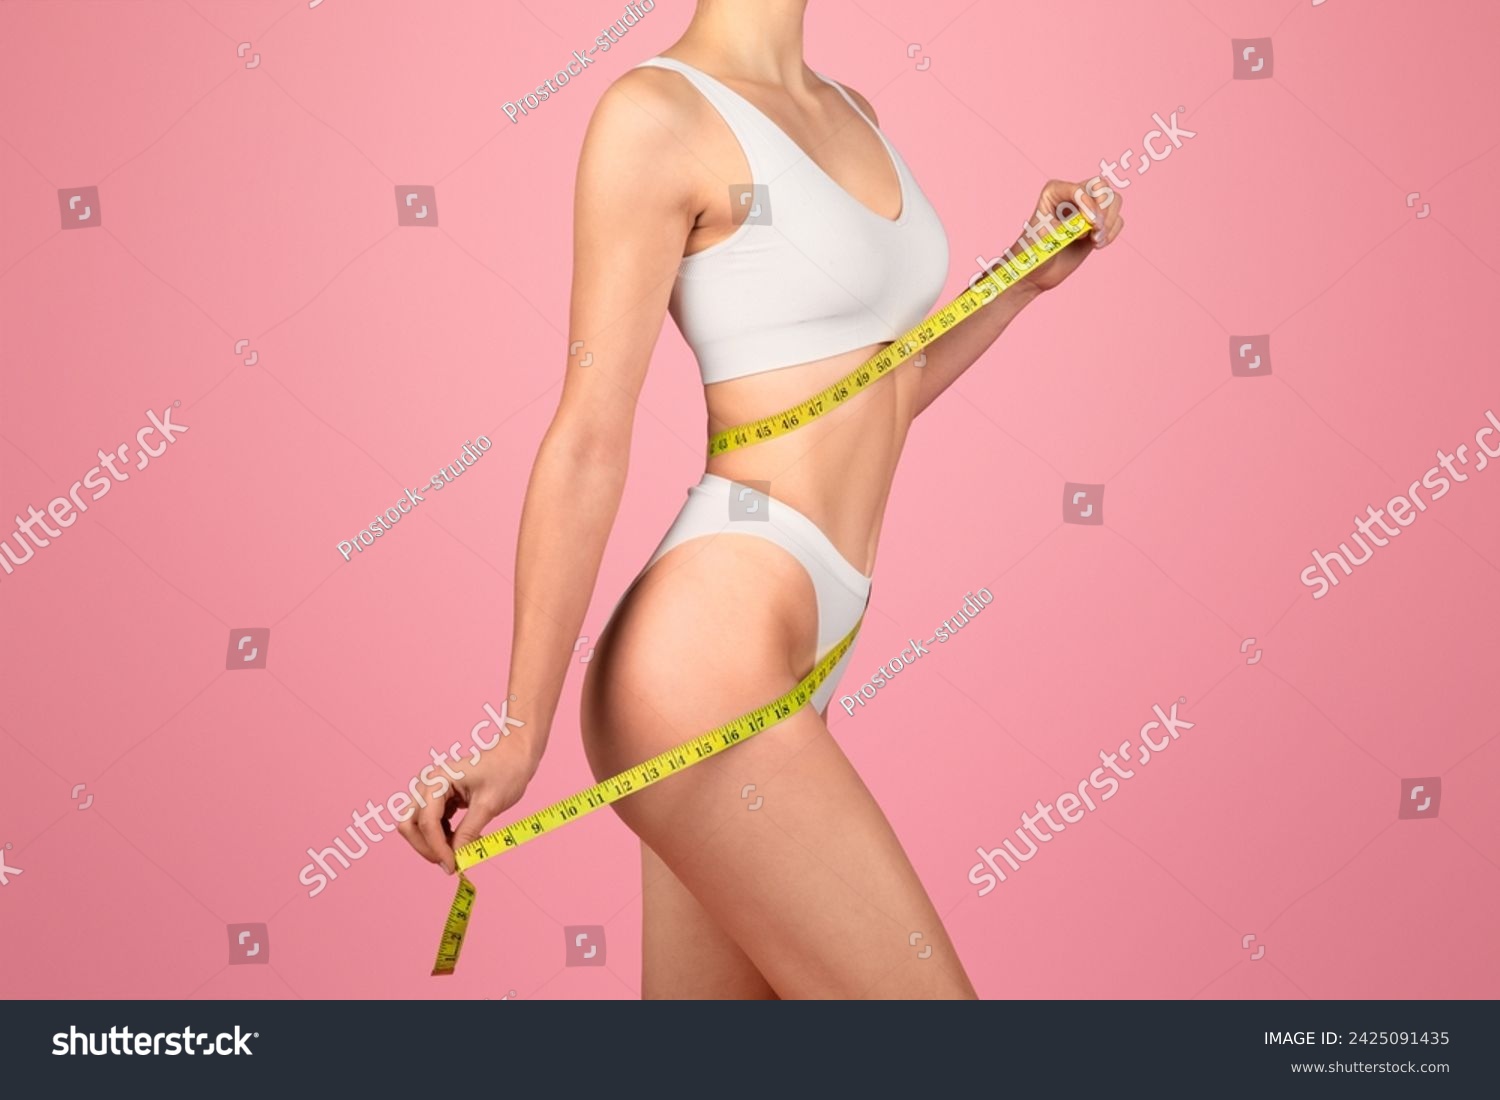 Side profile of a fit woman measuring her waist with a yellow tape measure, dressed in a white sports bra and underwear, against a vibrant pink background, showcasing health and body consciousness #2425091435